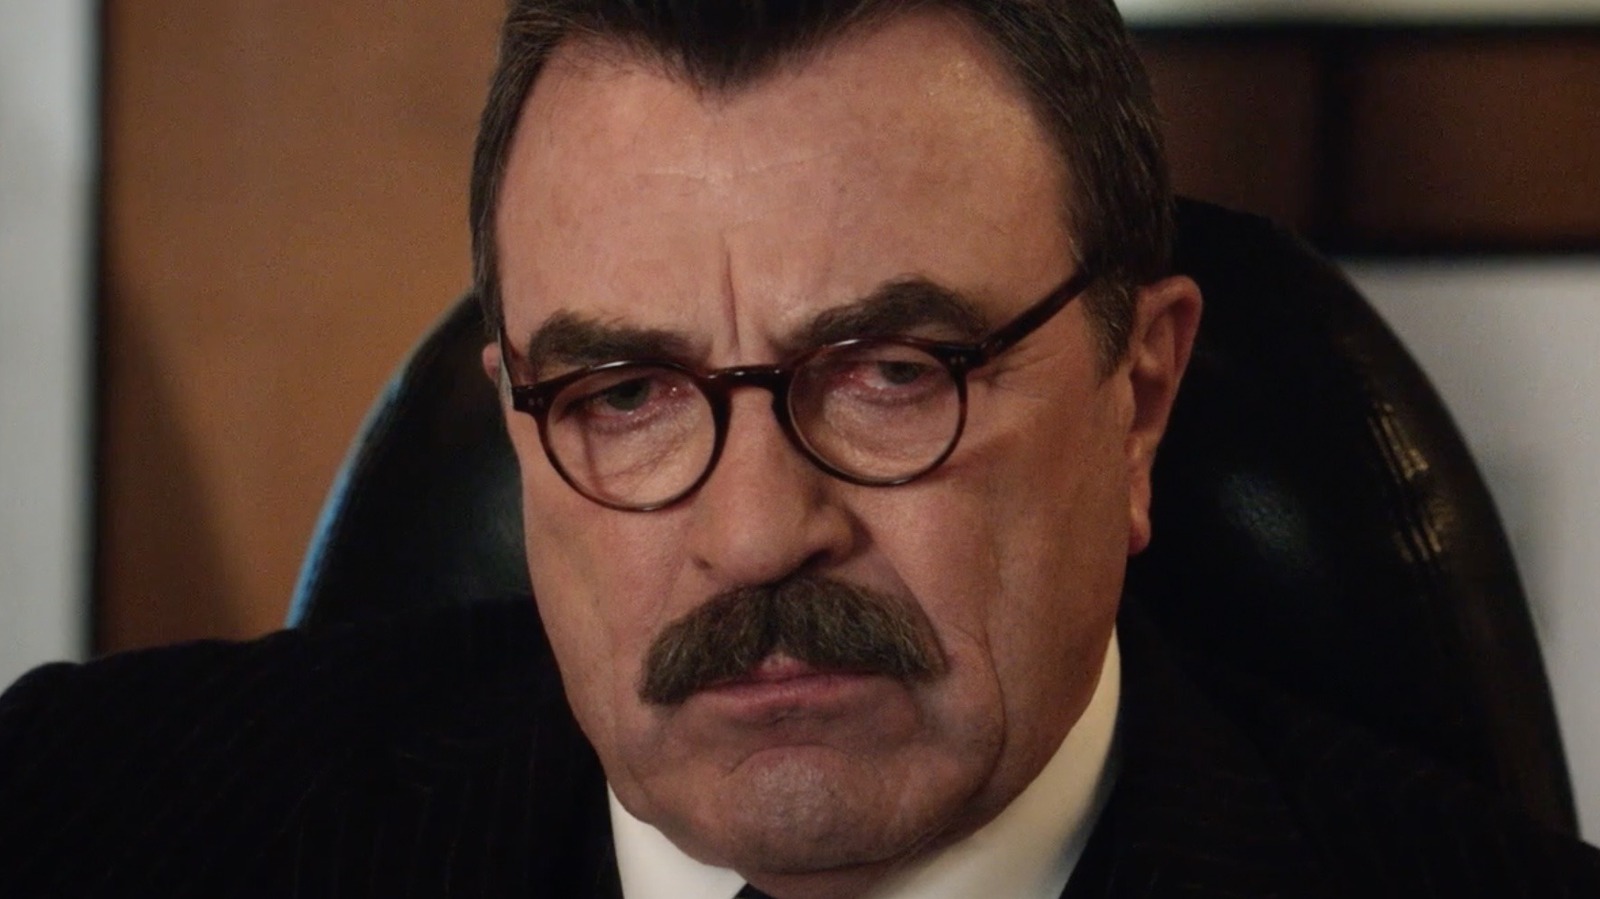 Exclusive Clip: Get A Sneak Peek At This Brand New Blue Bloods Featurette